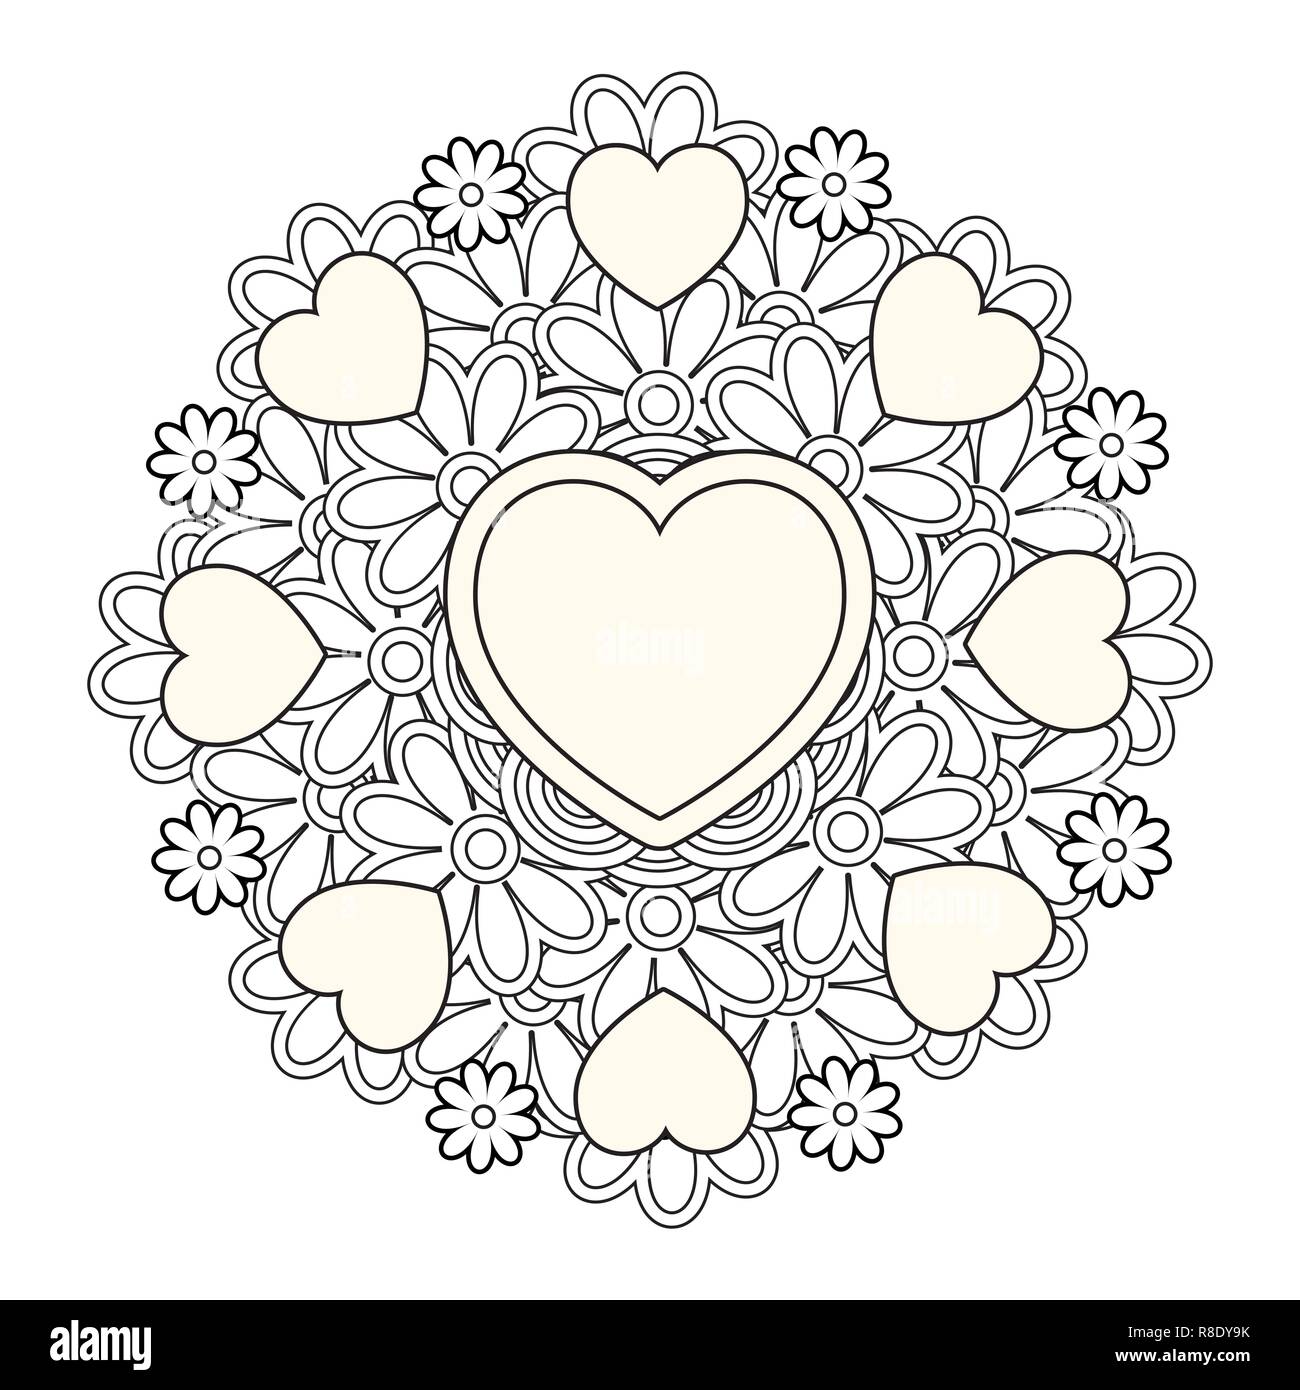 Flower mandala with hearts. Valentines day coloring page Stock ...